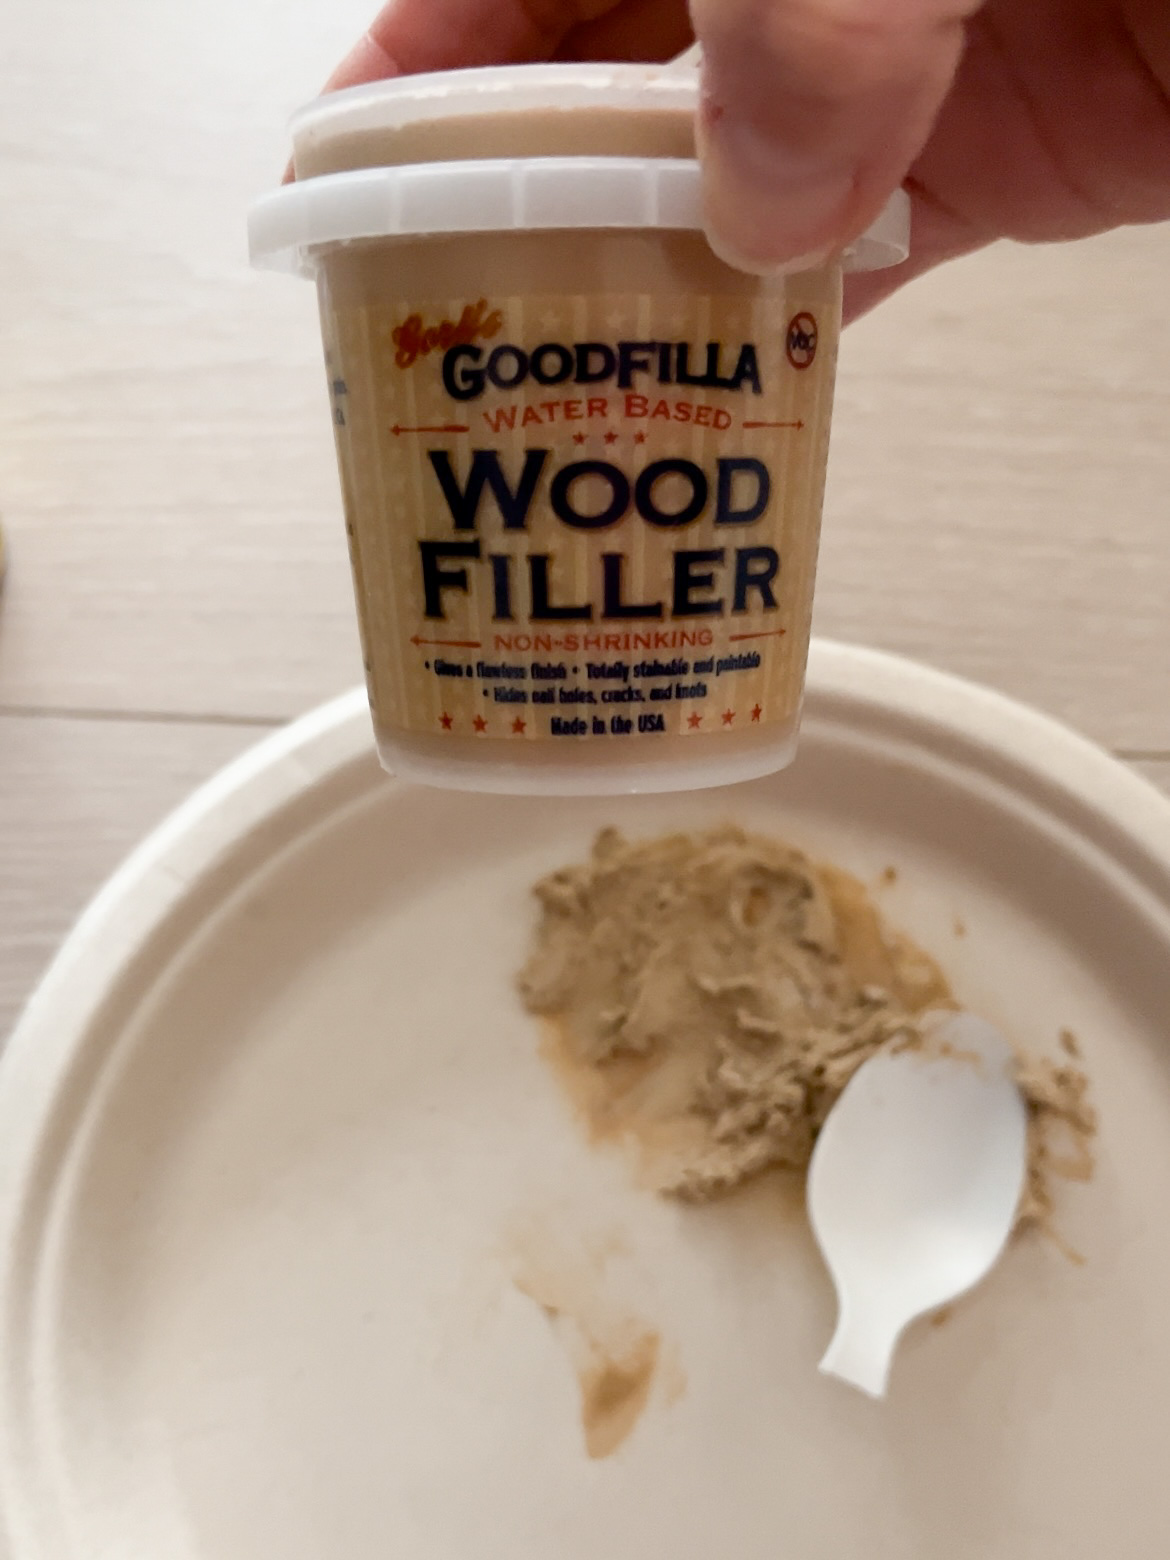 Hand holding a tub of Goodfilla Wood Filler.